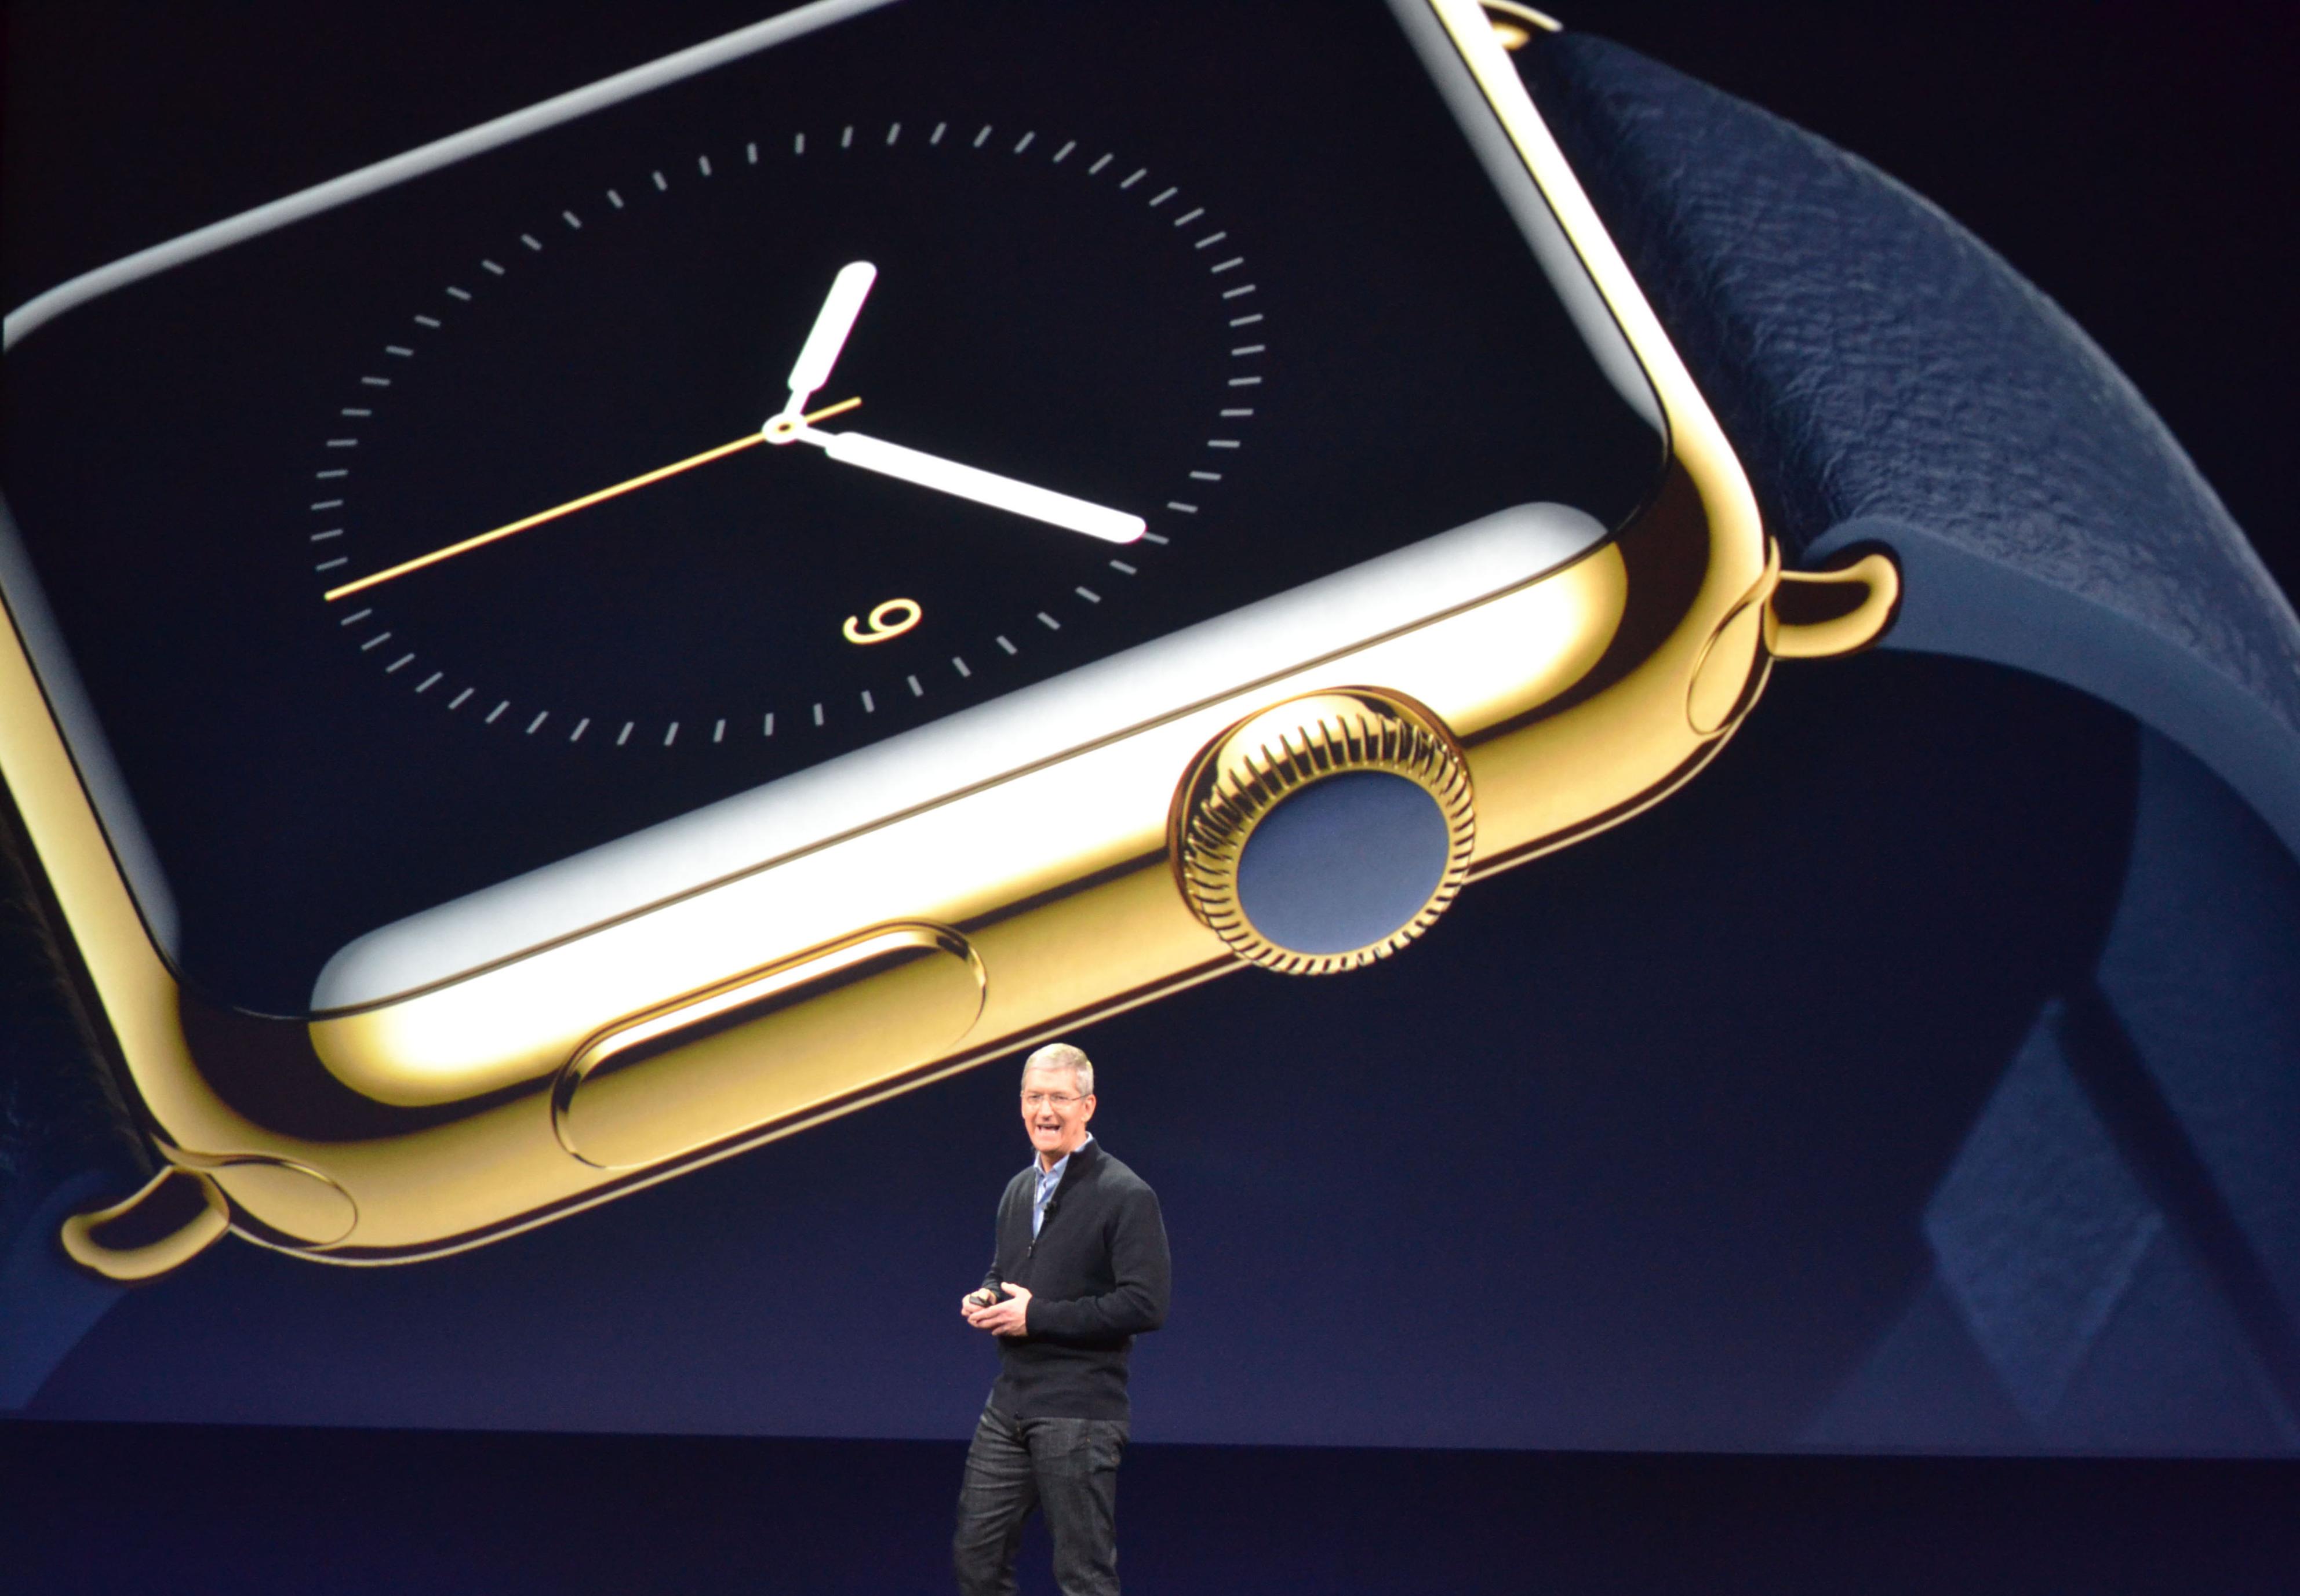 Apple CEO Tim Cook unveils the gold Apple Watch at an event in San Francisco in March 2015. Photo: Kyodo